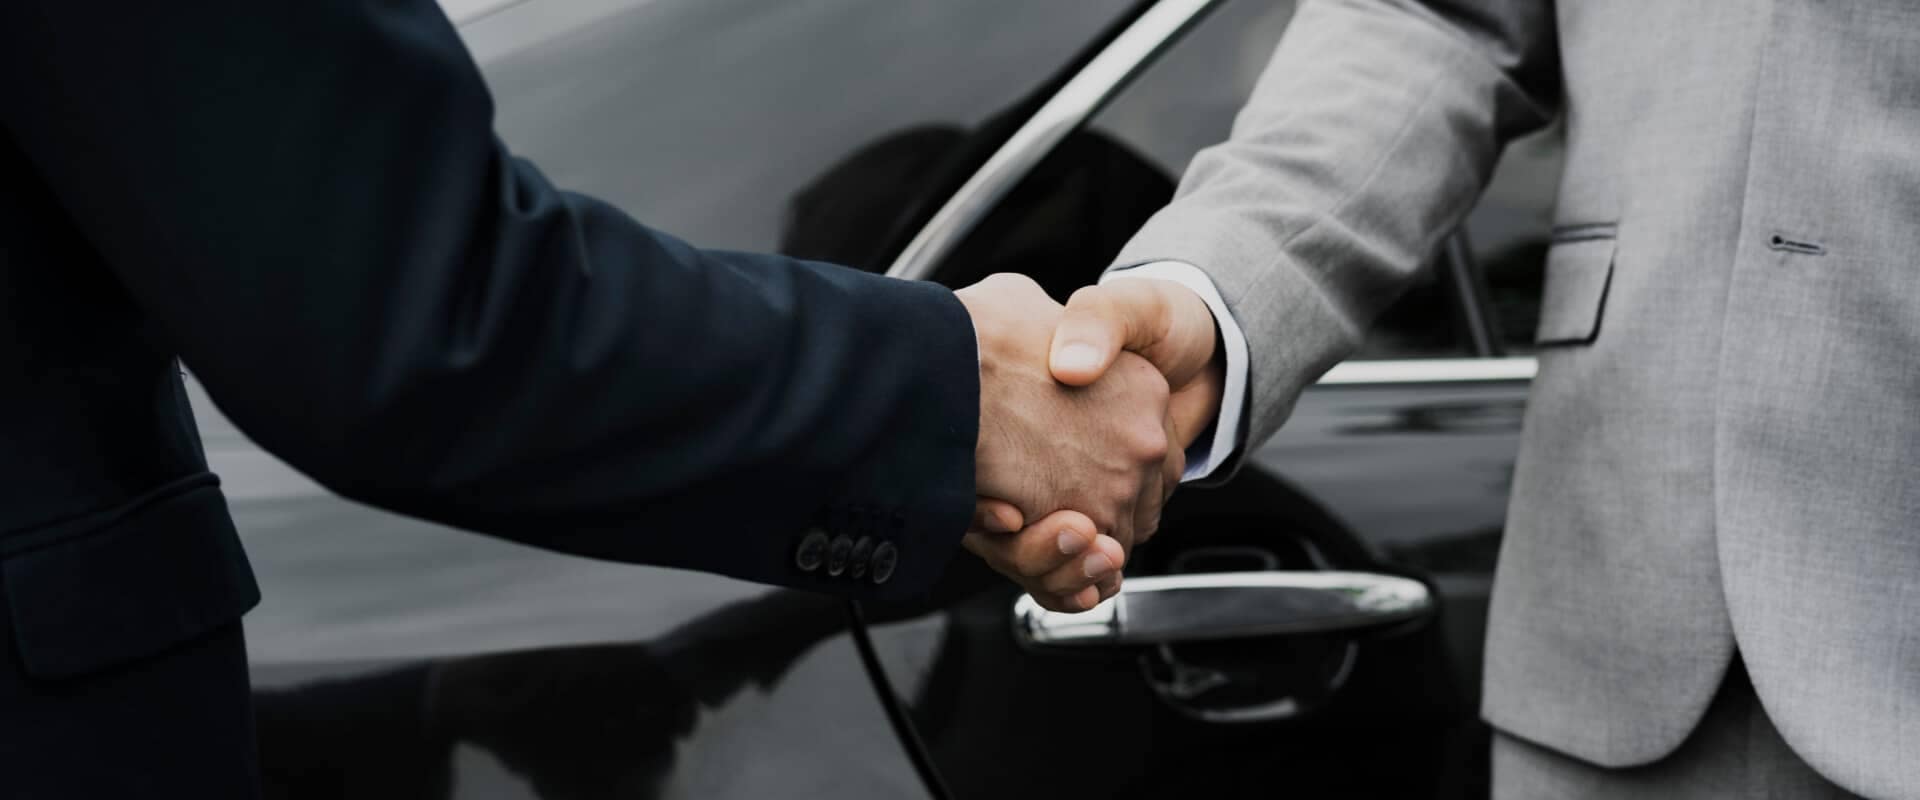 Two people shaking hands with a Mazda car in the background